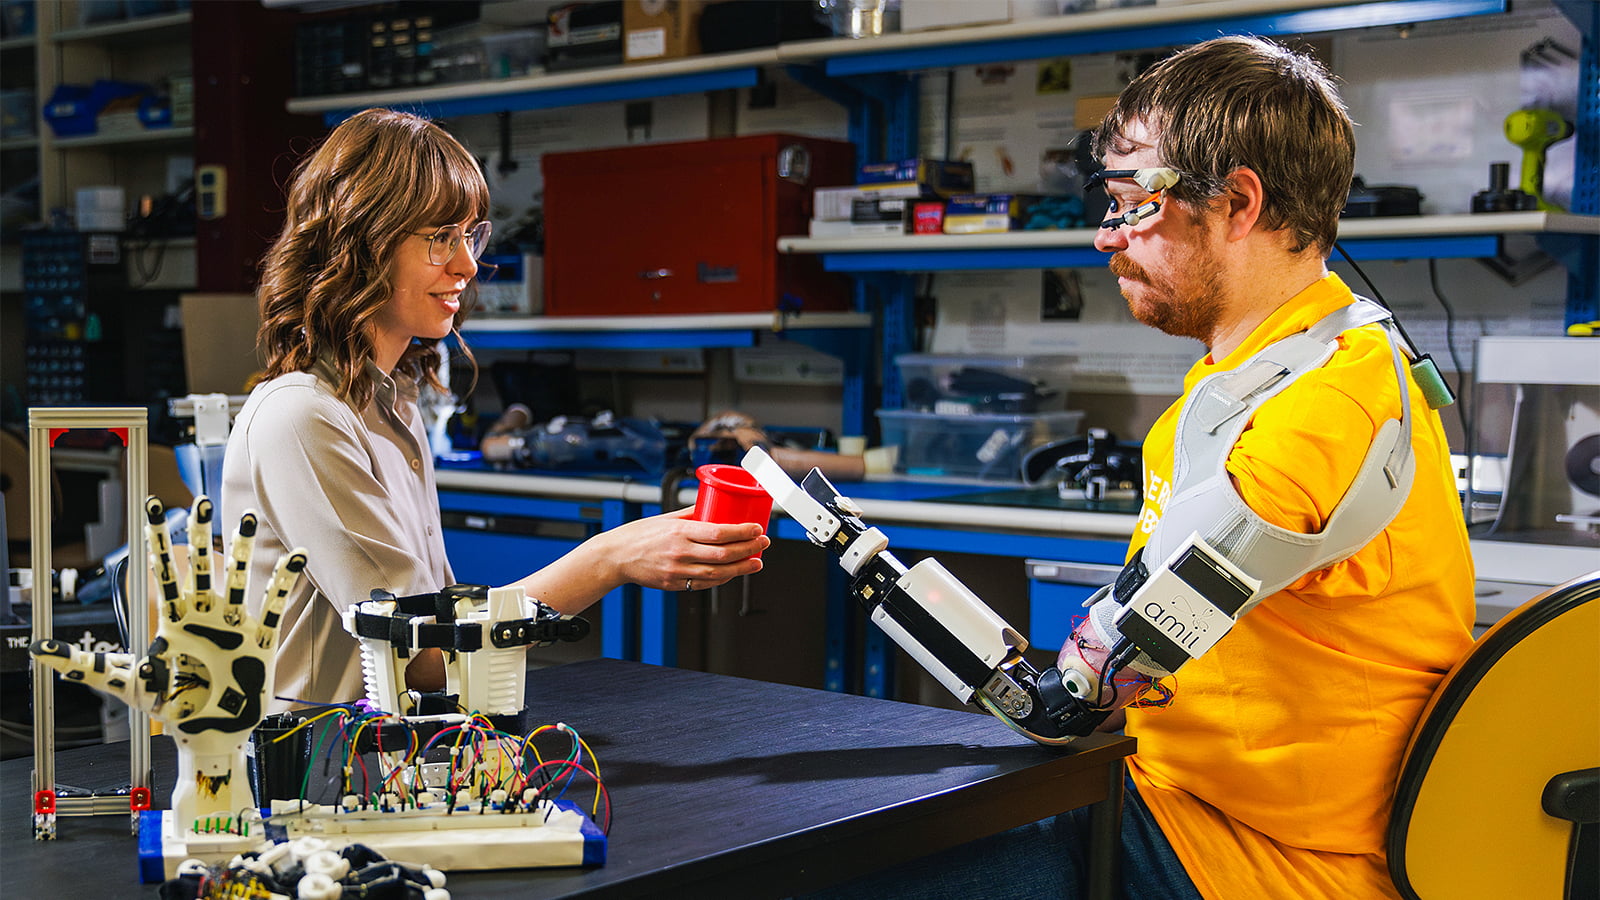 Research associate and biomedical engineering graduate Quinn Boser works with a prosthesis user in the Bionic Limbs for Improved Natural Control (BLINC) laboratory at the University of Alberta. (Photo: Alex Pugliese)